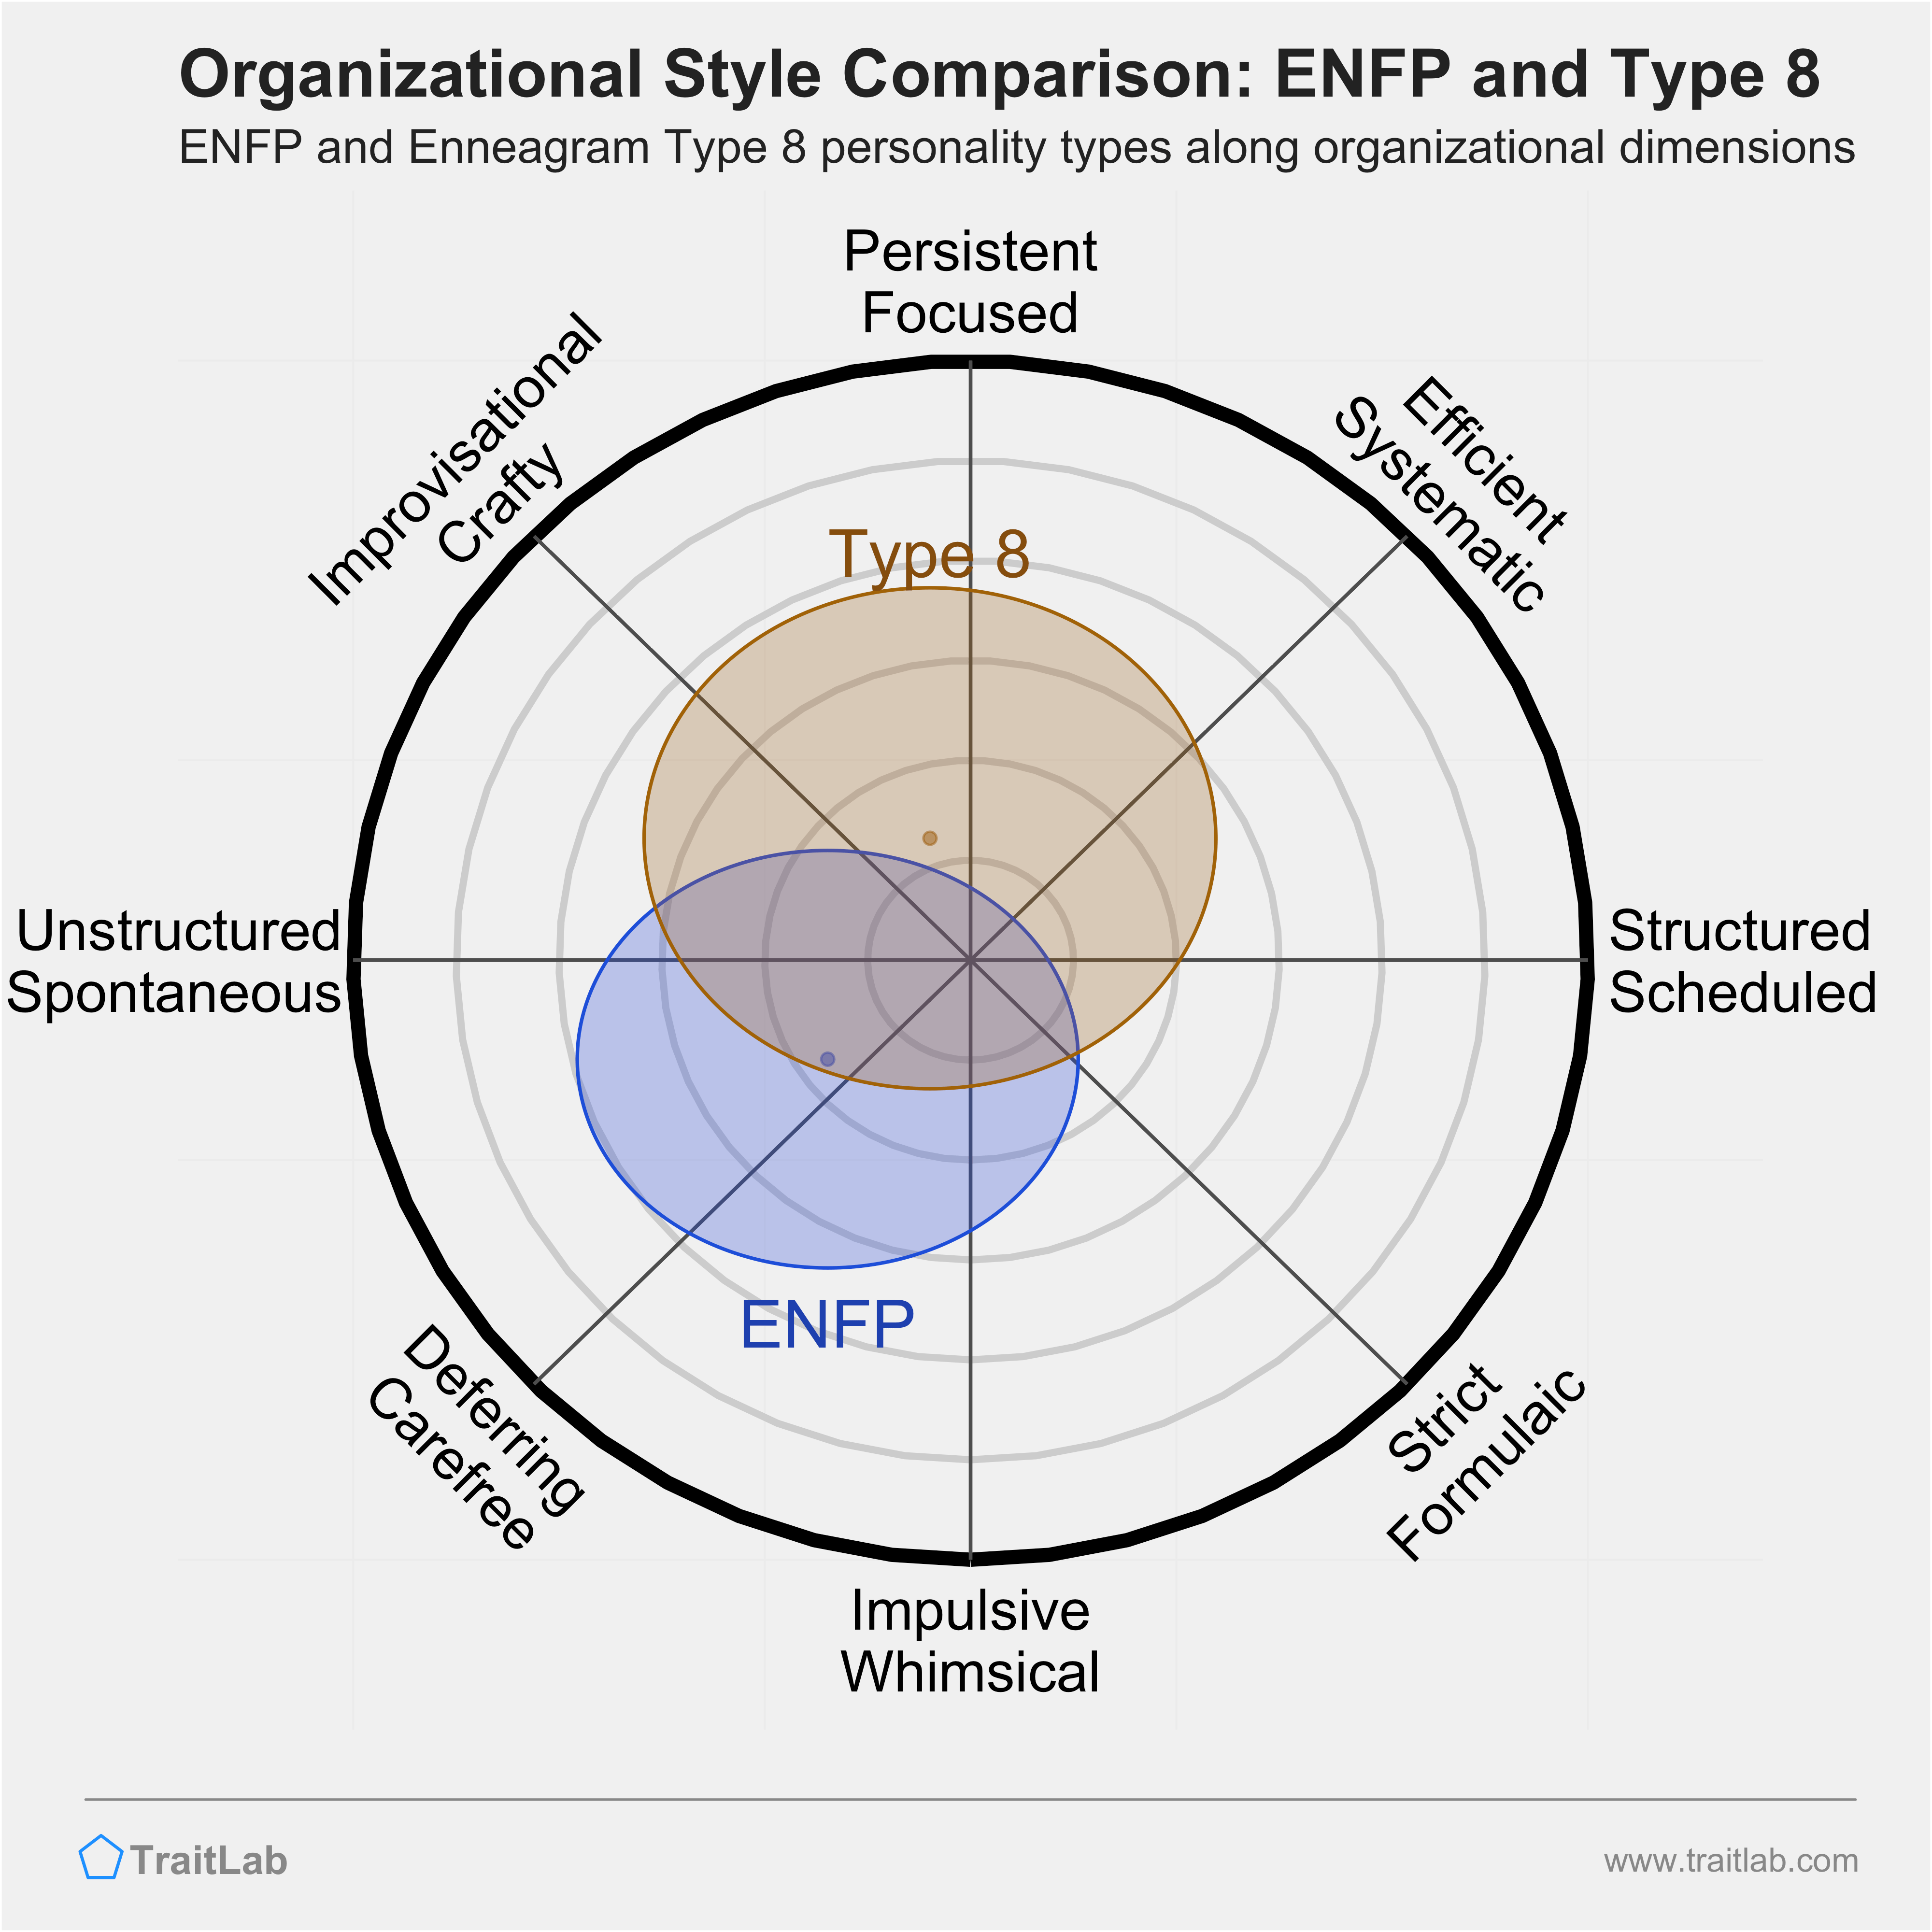 ENFP and Type 8 comparison across organizational dimensions